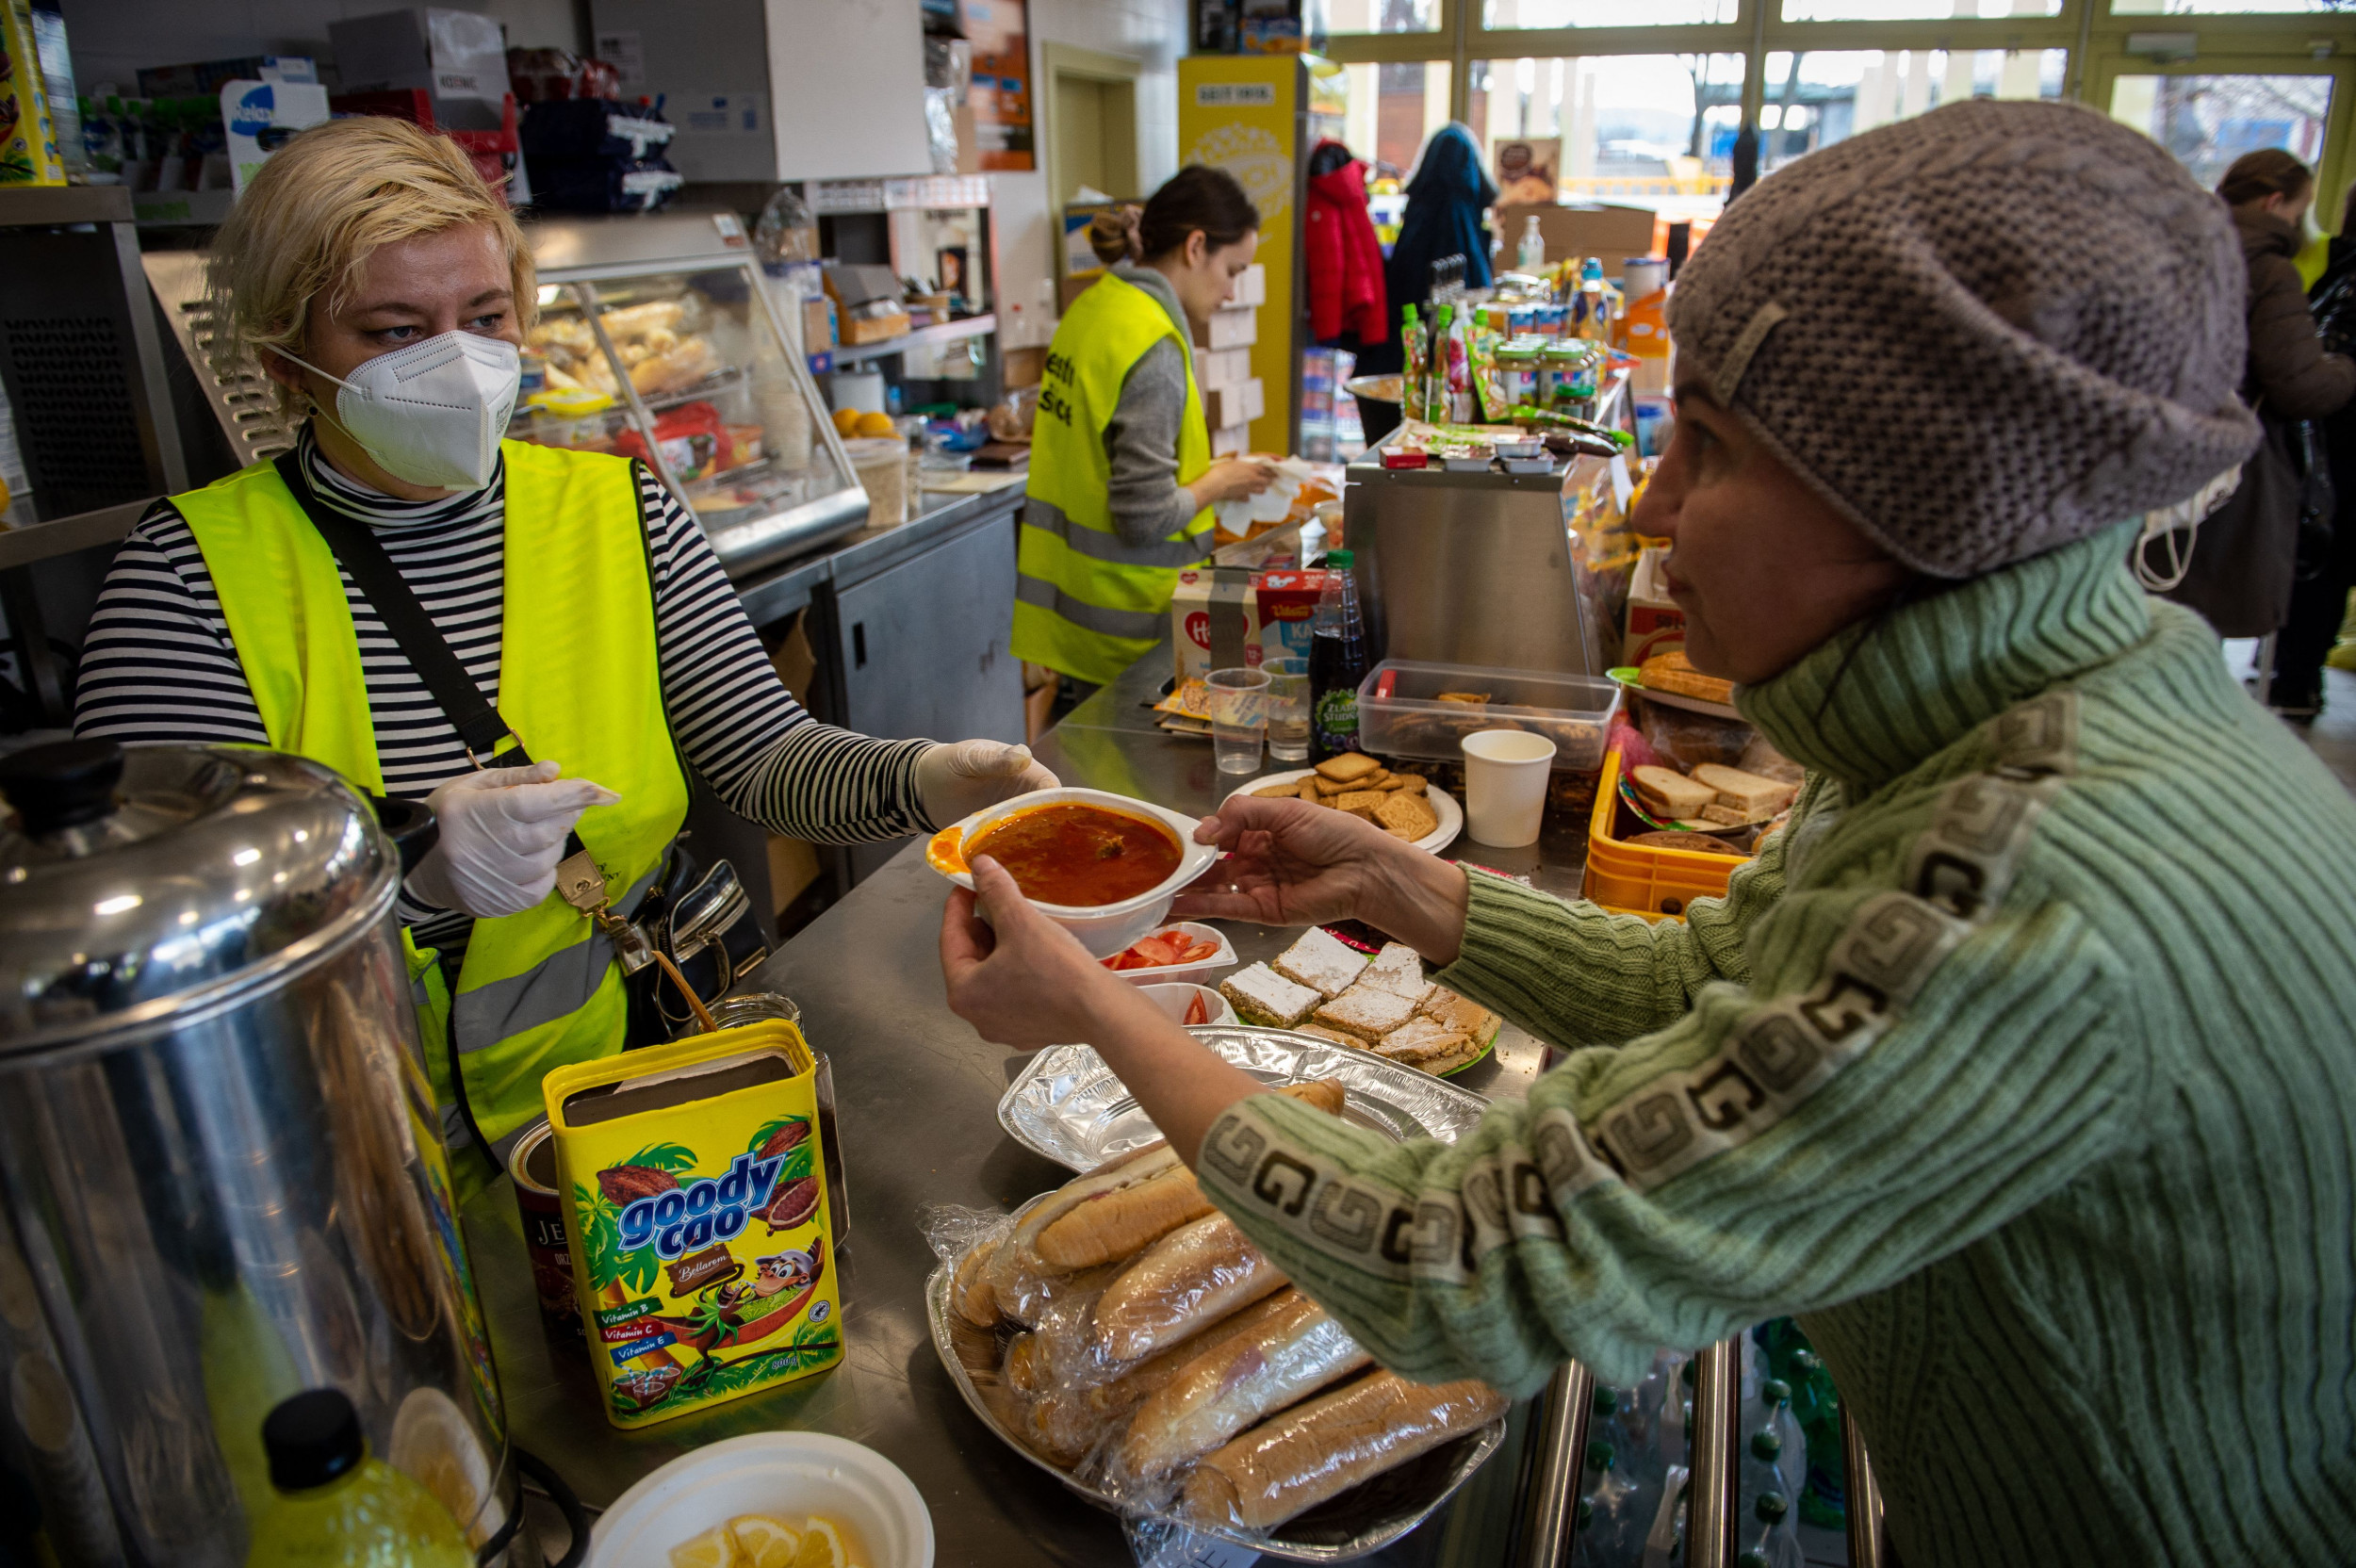 World Central Kitchen Shares Huge Operation to Feed Ukrainian Refugees